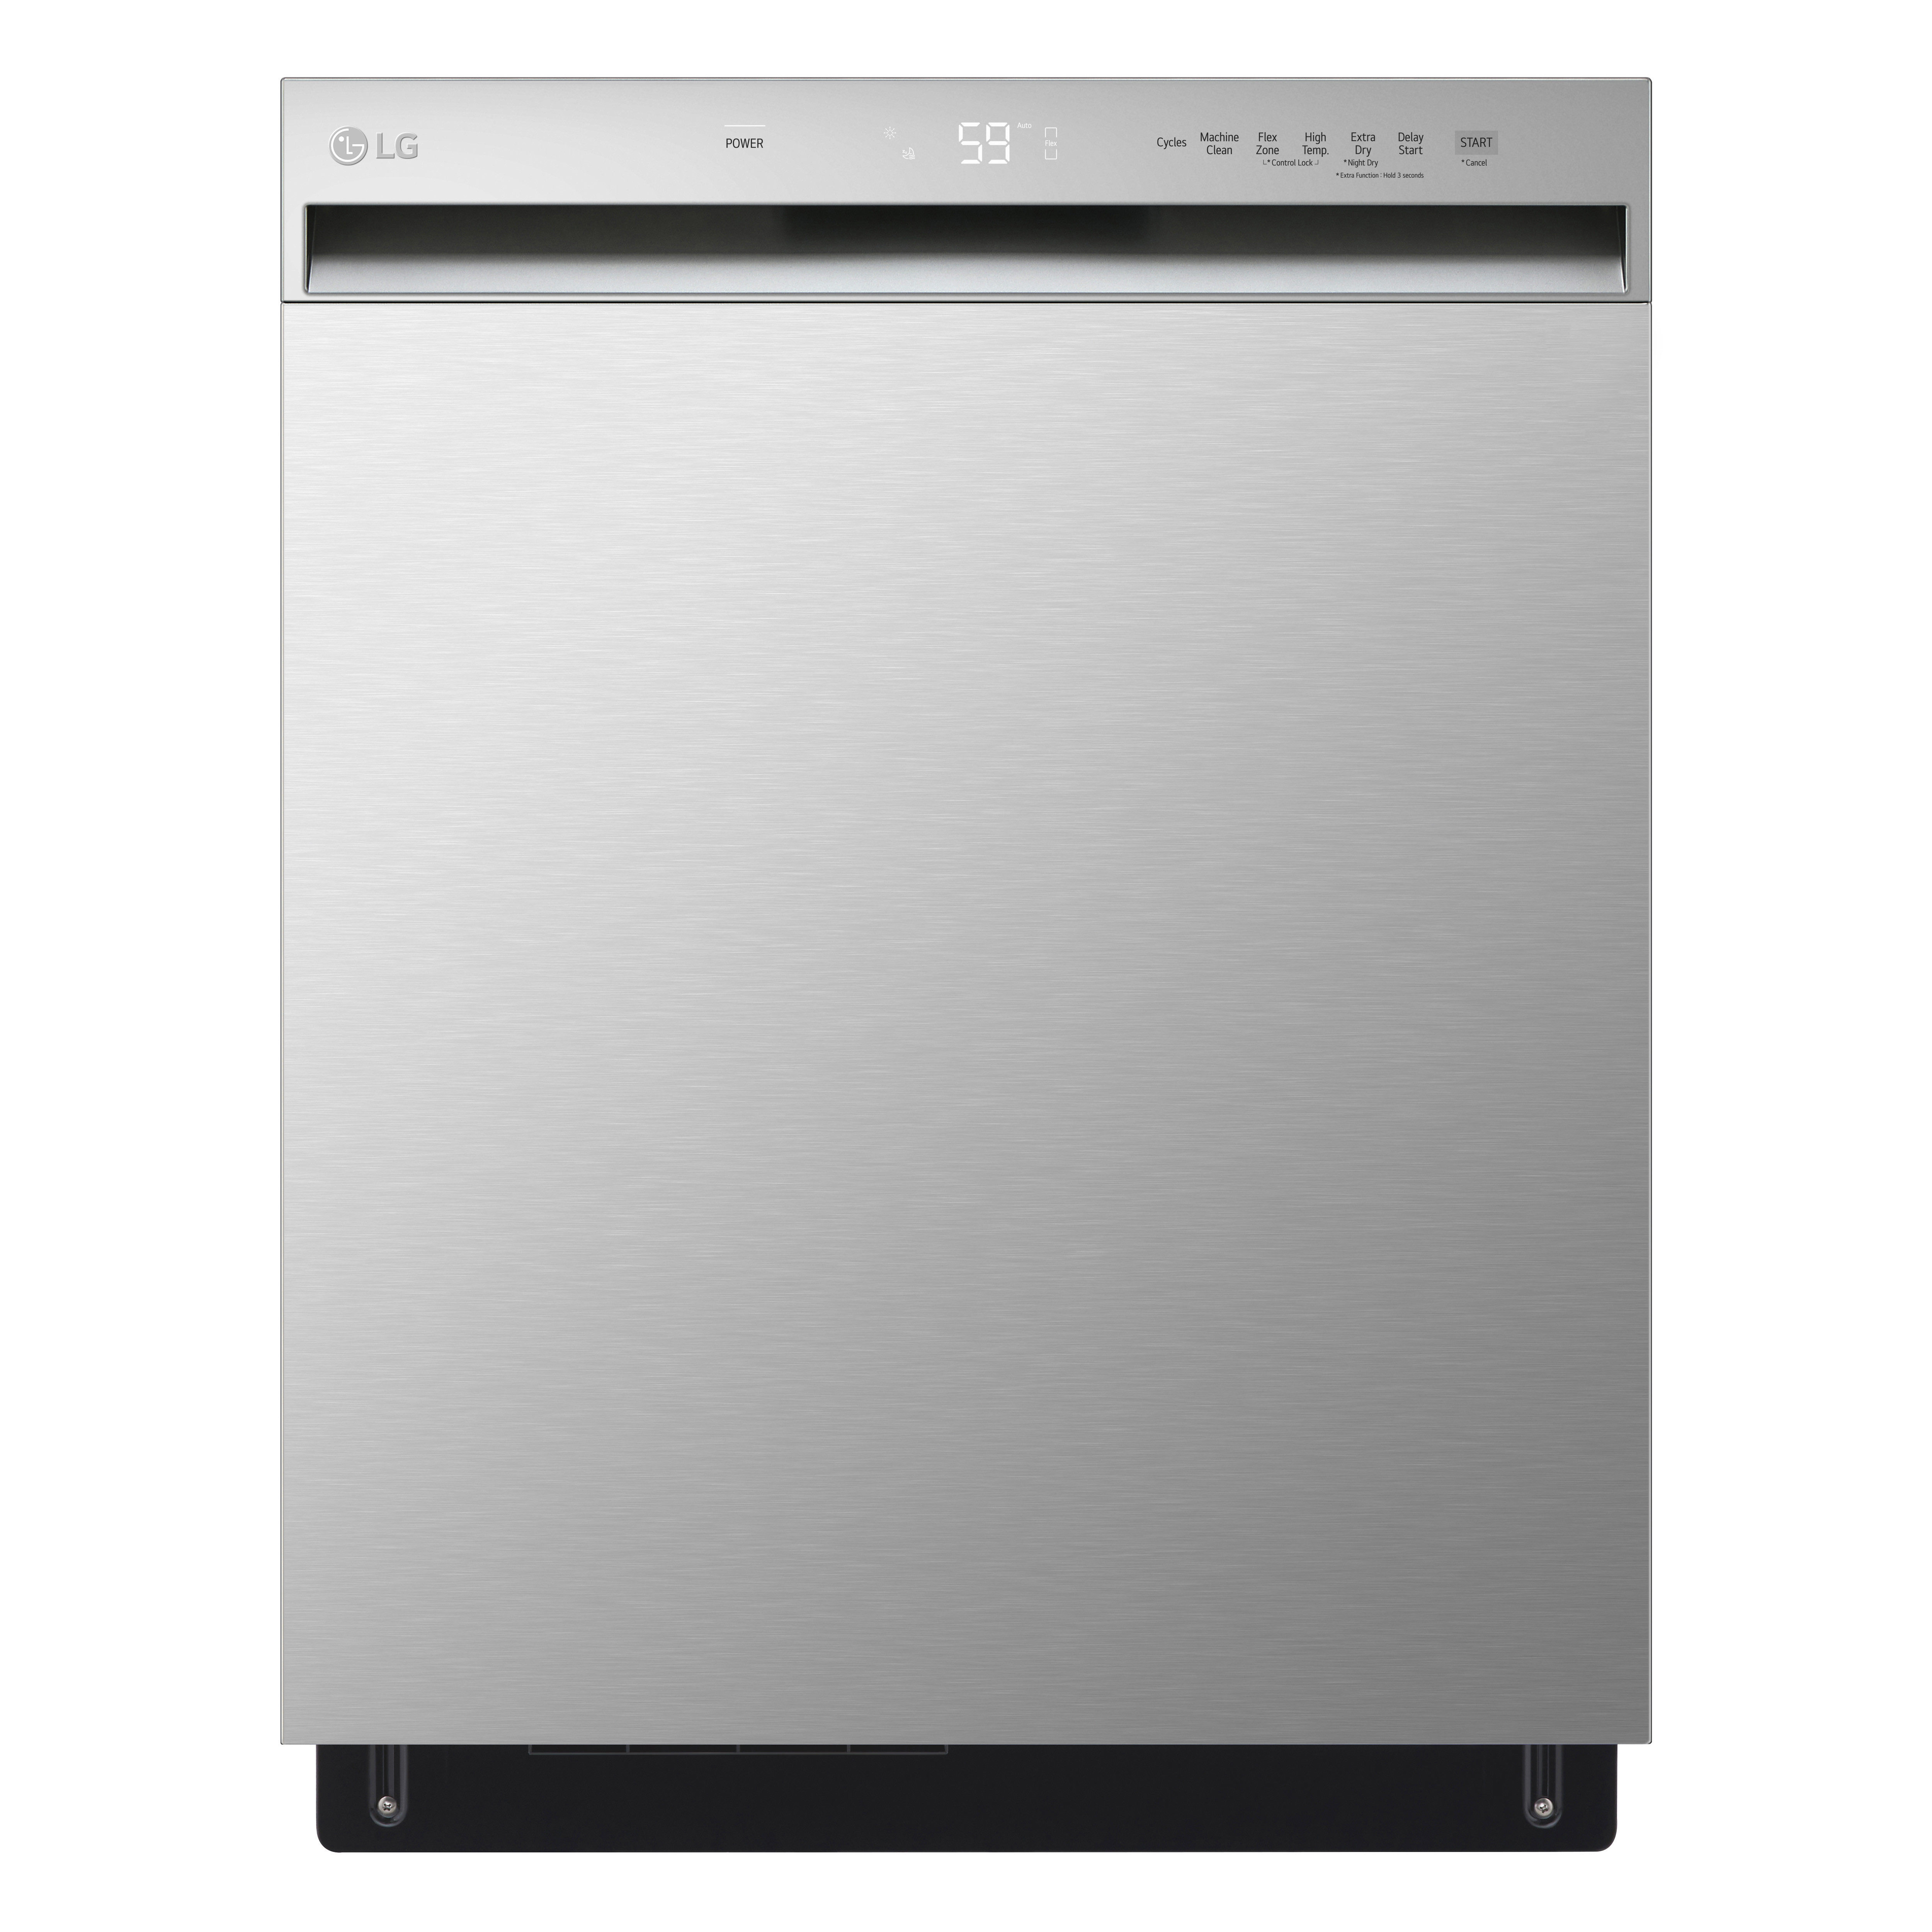 tainless steel dishwasher with digital front panel